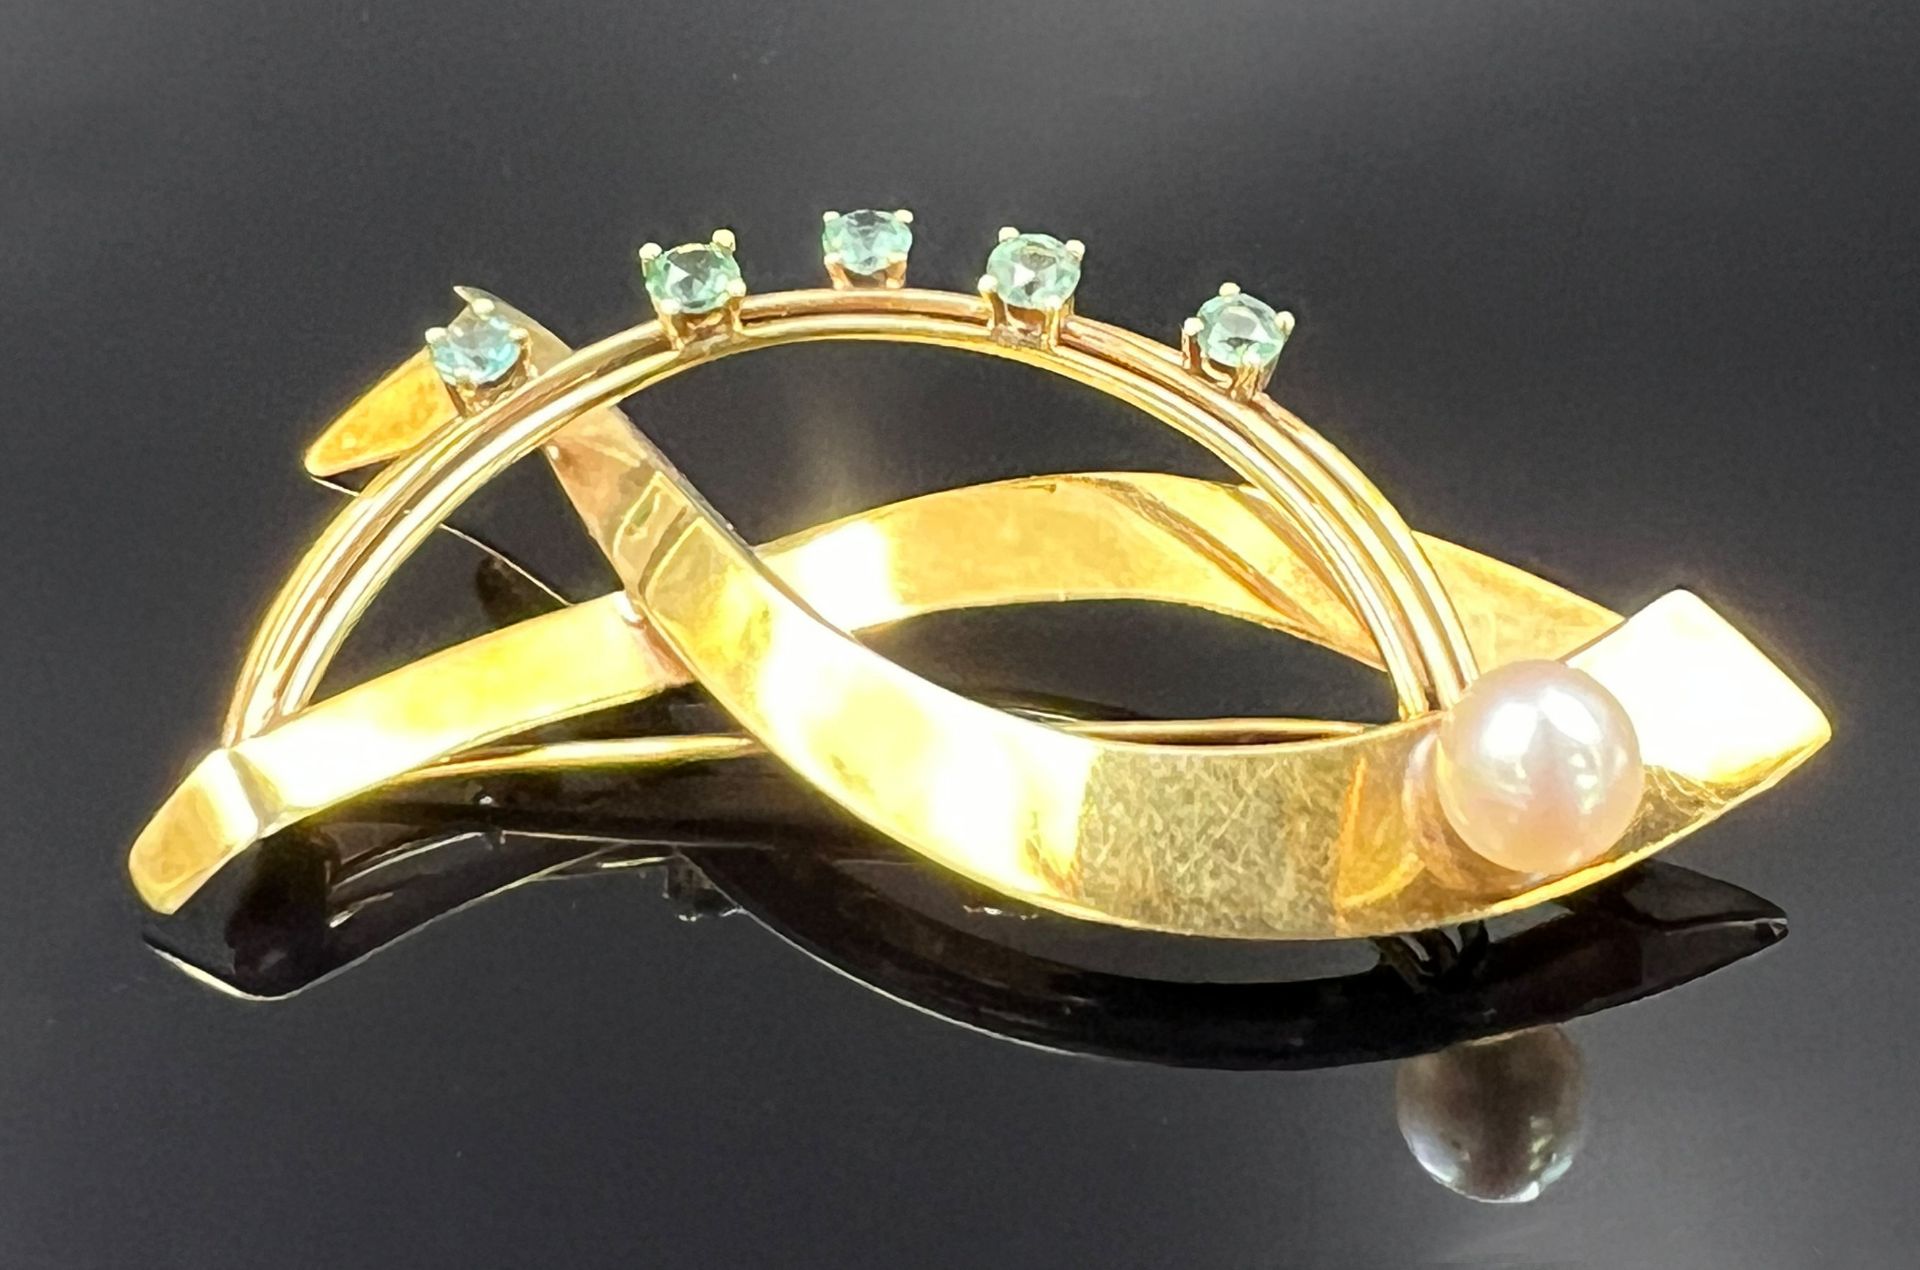 Brooch. 585 yellow gold with a pearl and light green coloured stones.